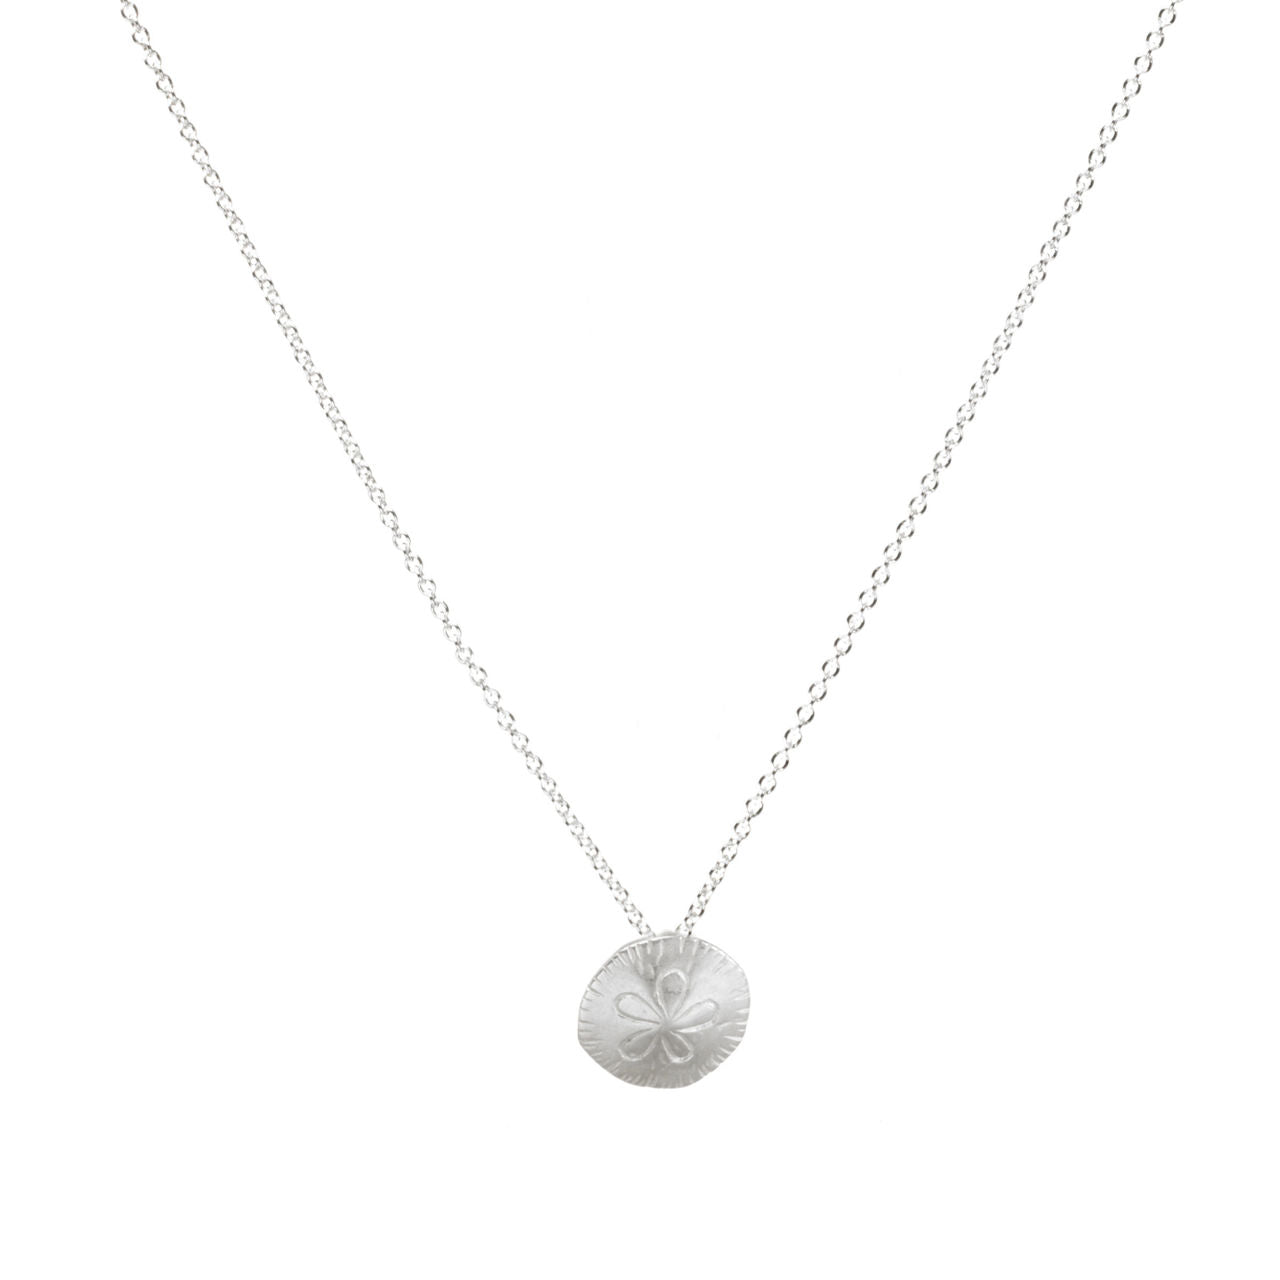 Sand Dollar Necklace With Crystals — Ocean Jewelry